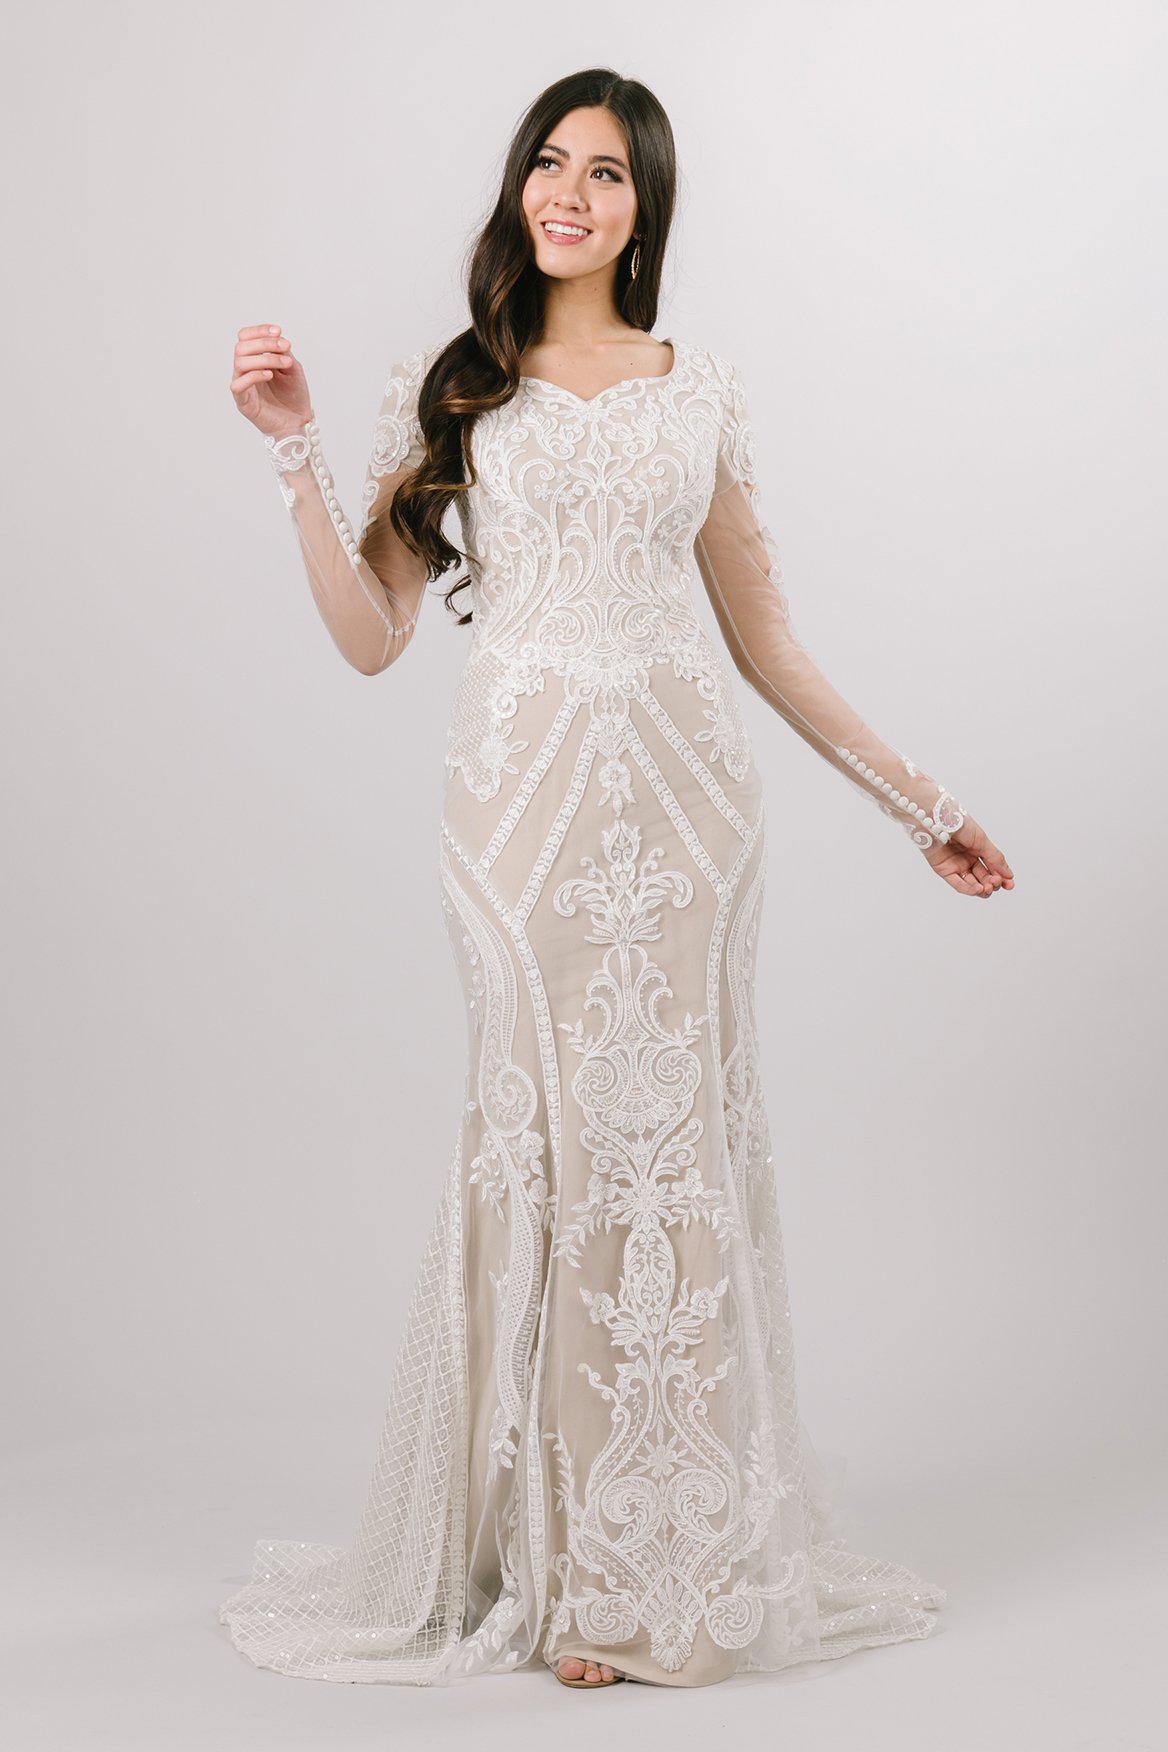 Modest wedding dress with long sleeves. It has a heart shaped neckline and fitted silhouette. It has lace detailing covering the whole dress. It has buttons on the sleeves. 